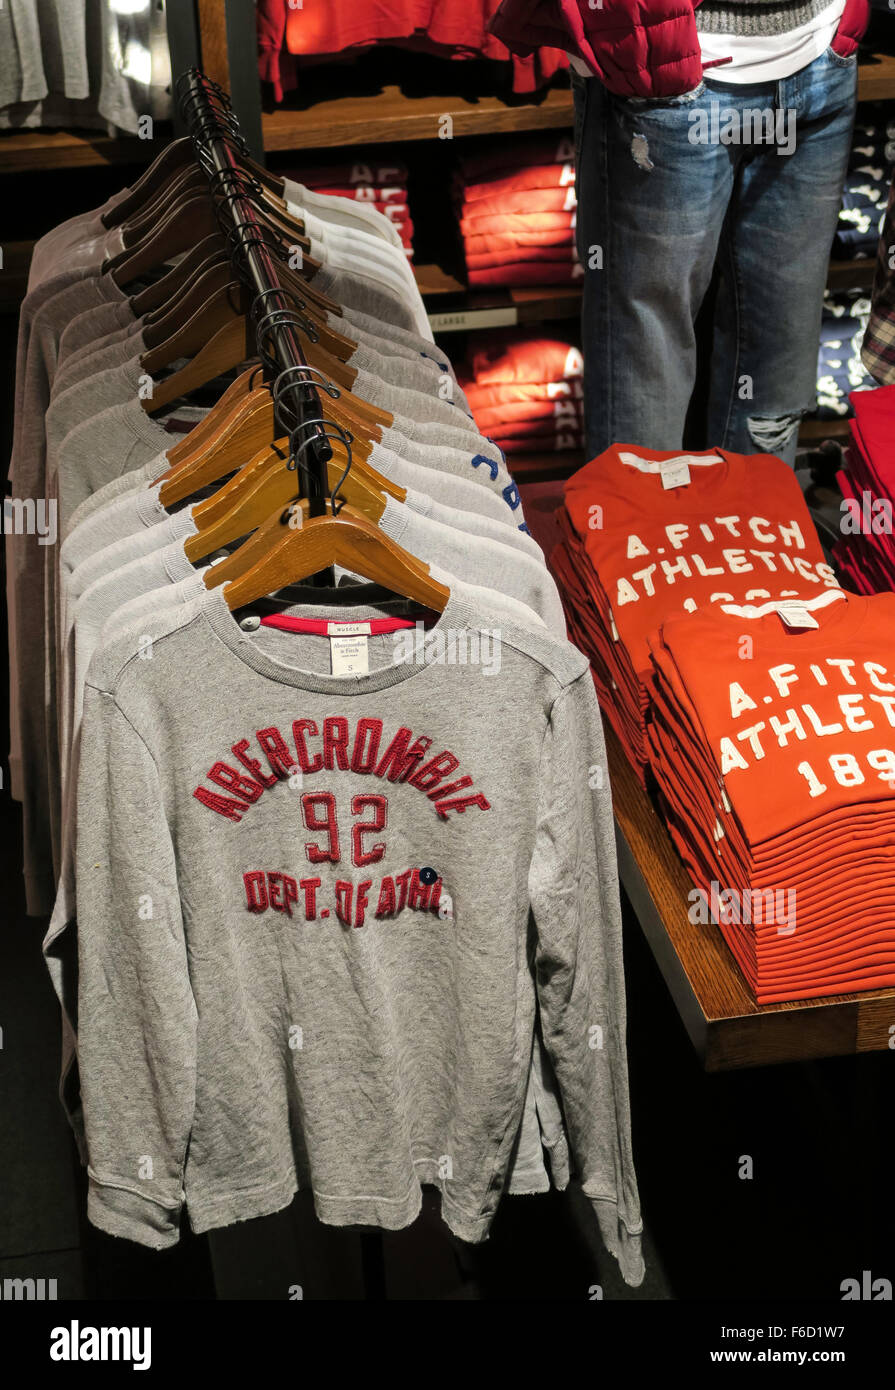 Abercrombie & Fitch Flagship Store Interior, Fifth Avenue, NYC Stock Photo